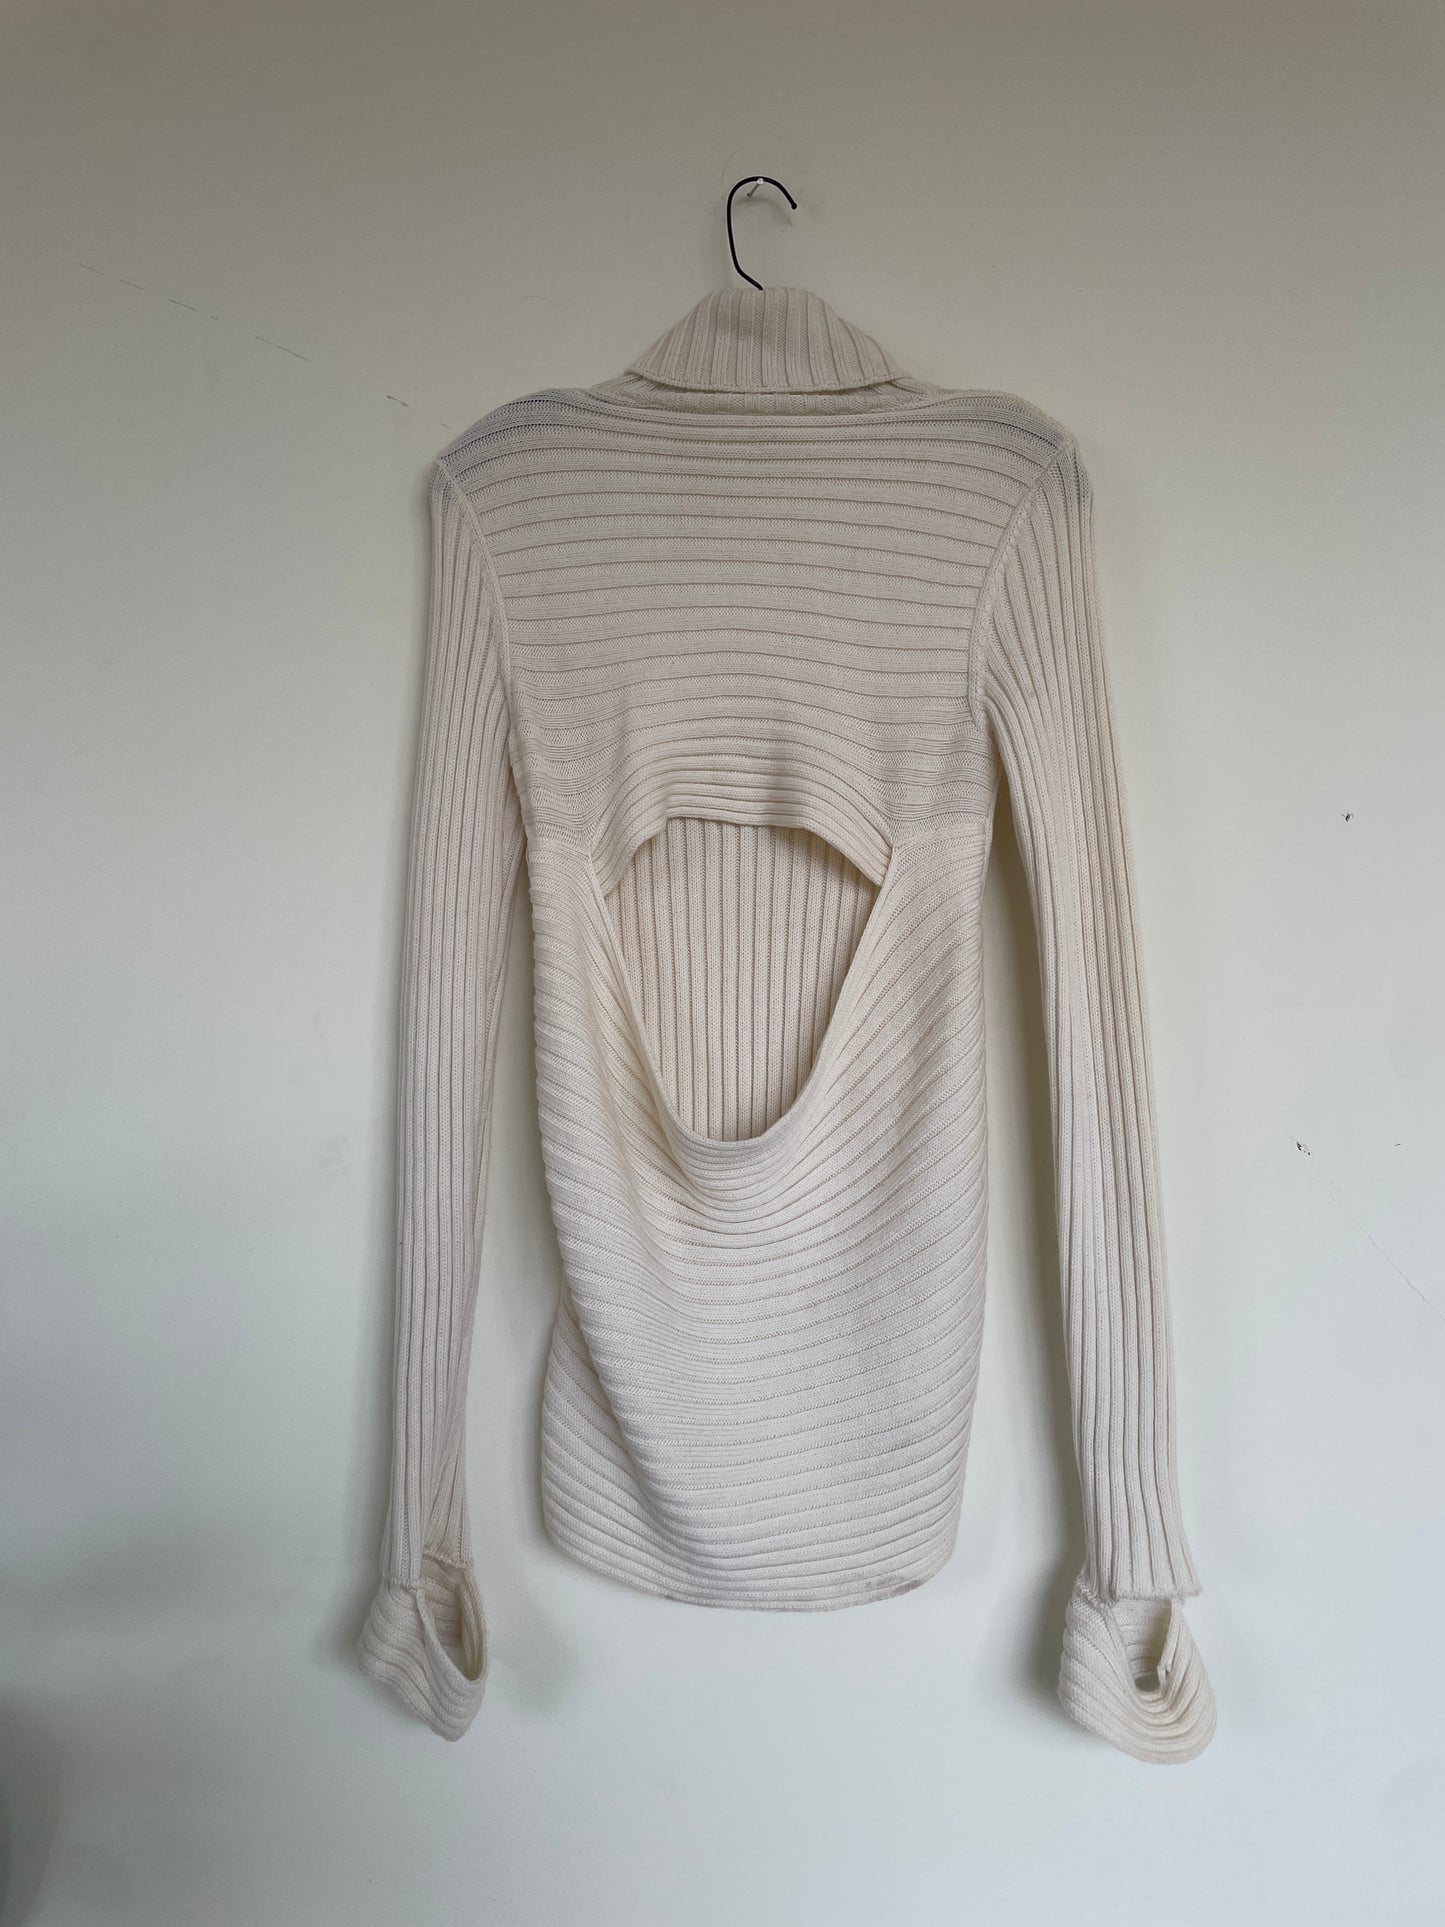 Helmut Lang 90's off-white knit sweater with cut out wrists and back